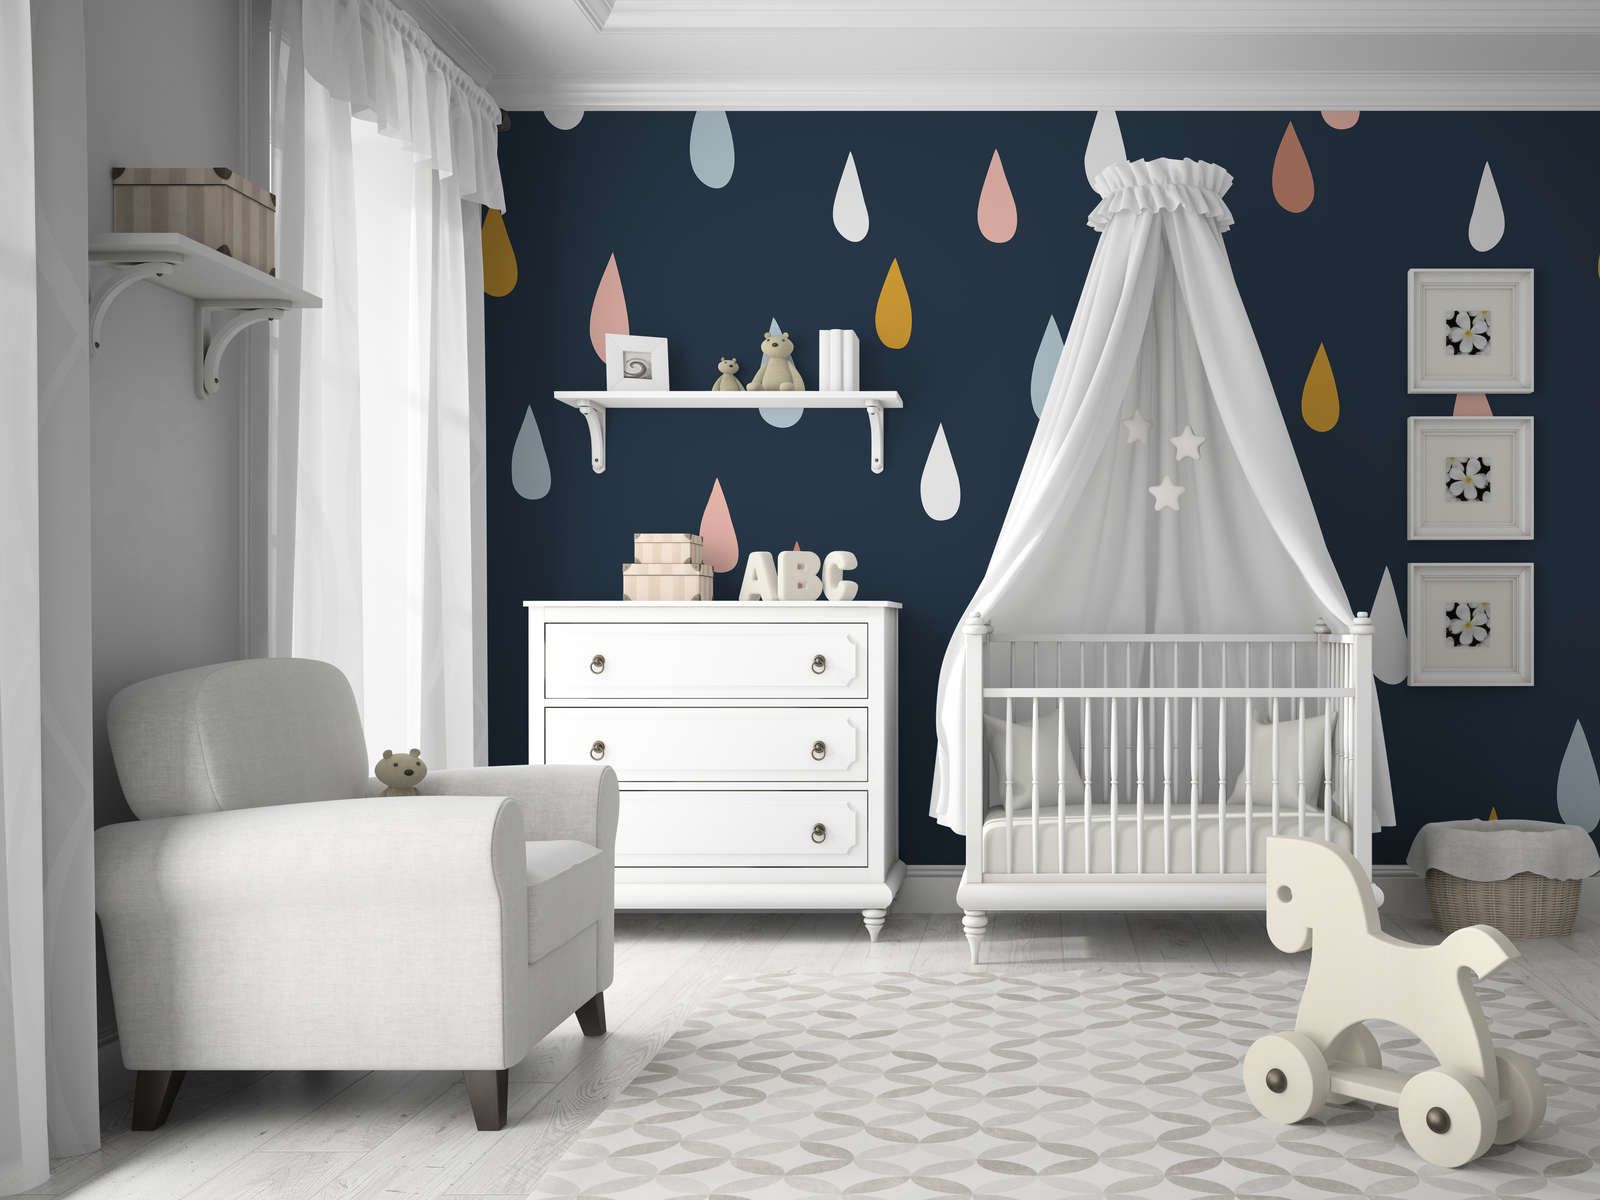             Nursery mural with colourful drops - Smooth & pearlescent fleece
        